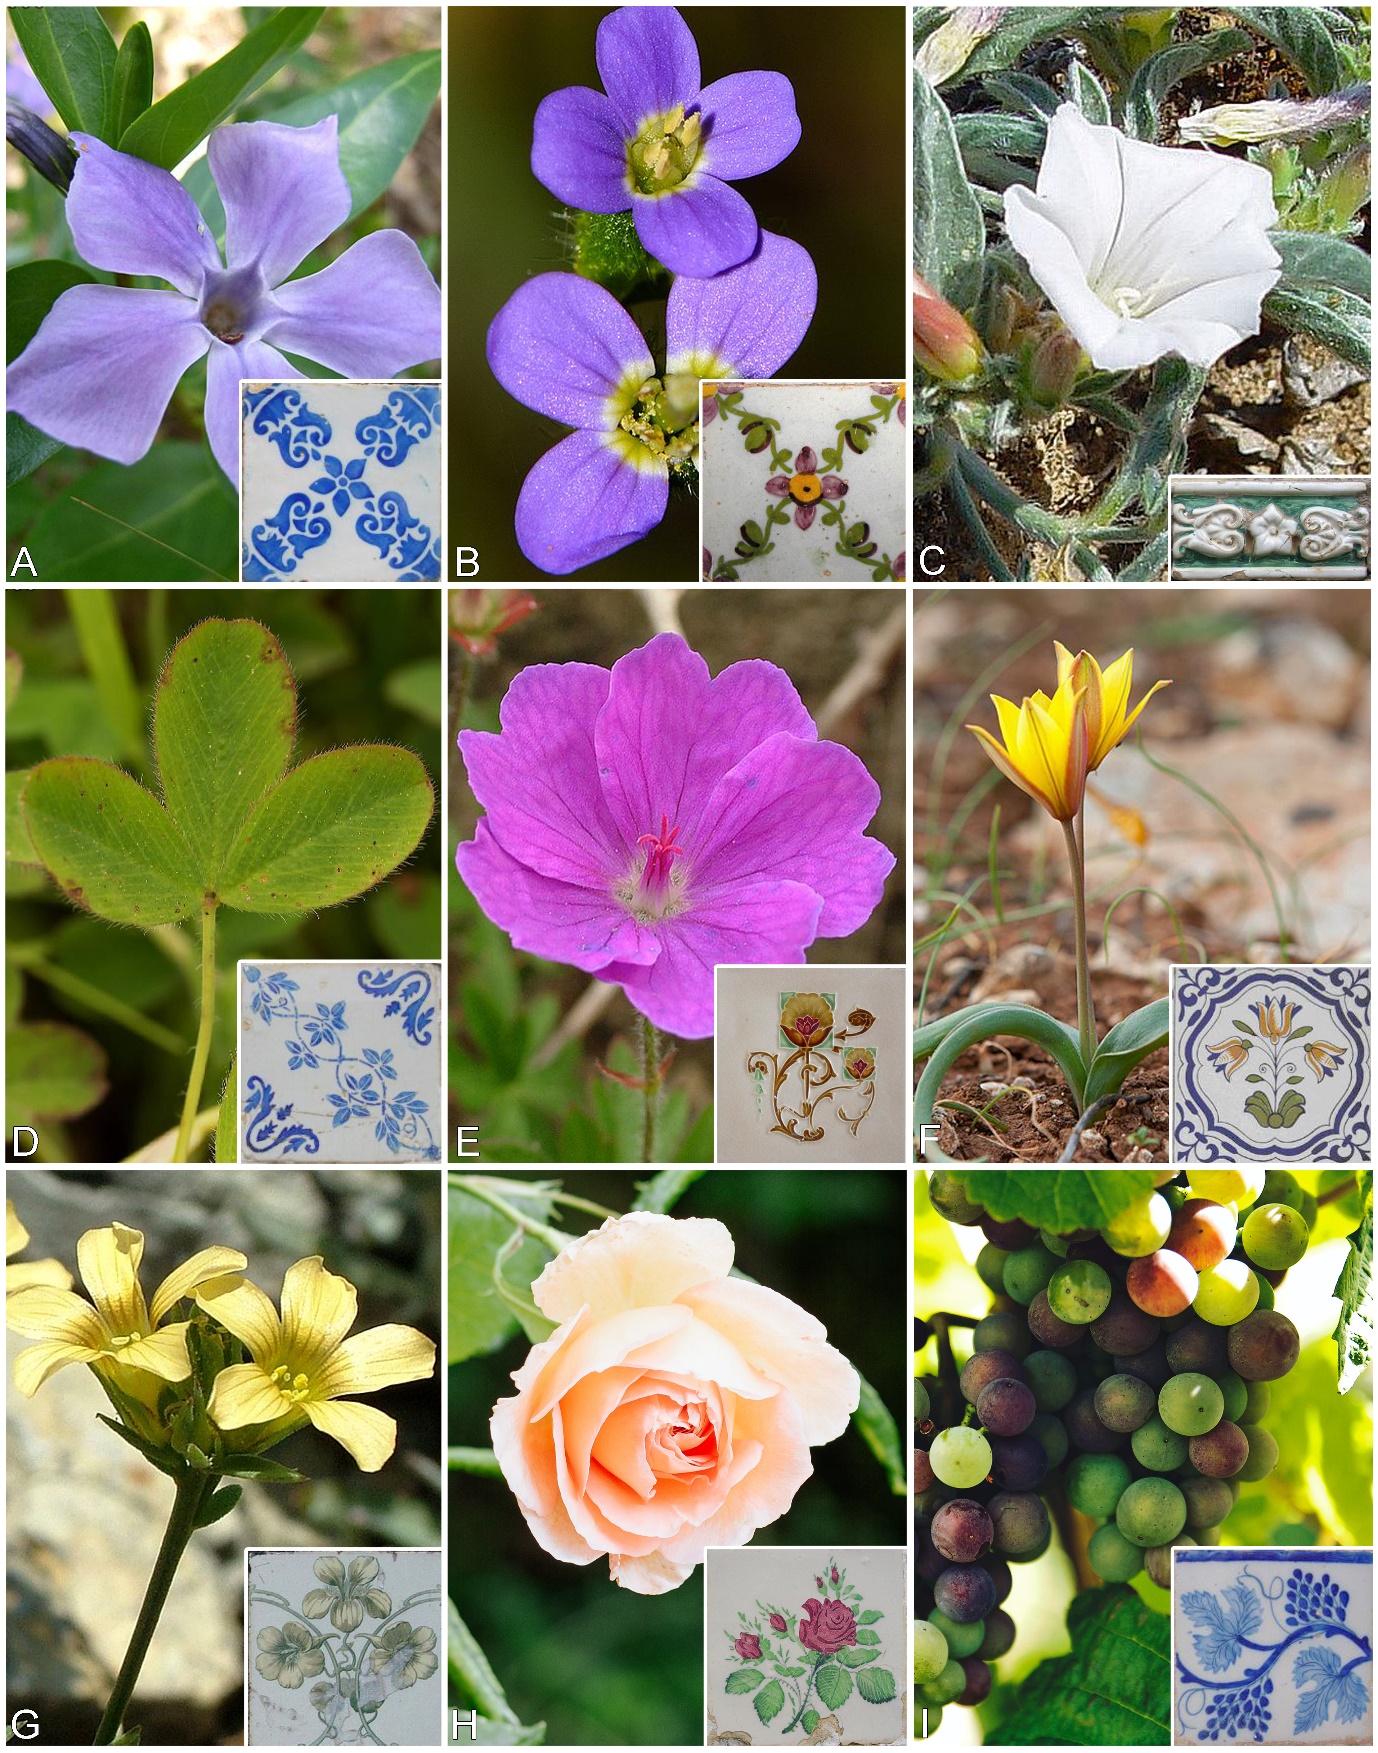 Nine images of plants, with an inset of a Portuguese tile depicting each plant respectively.